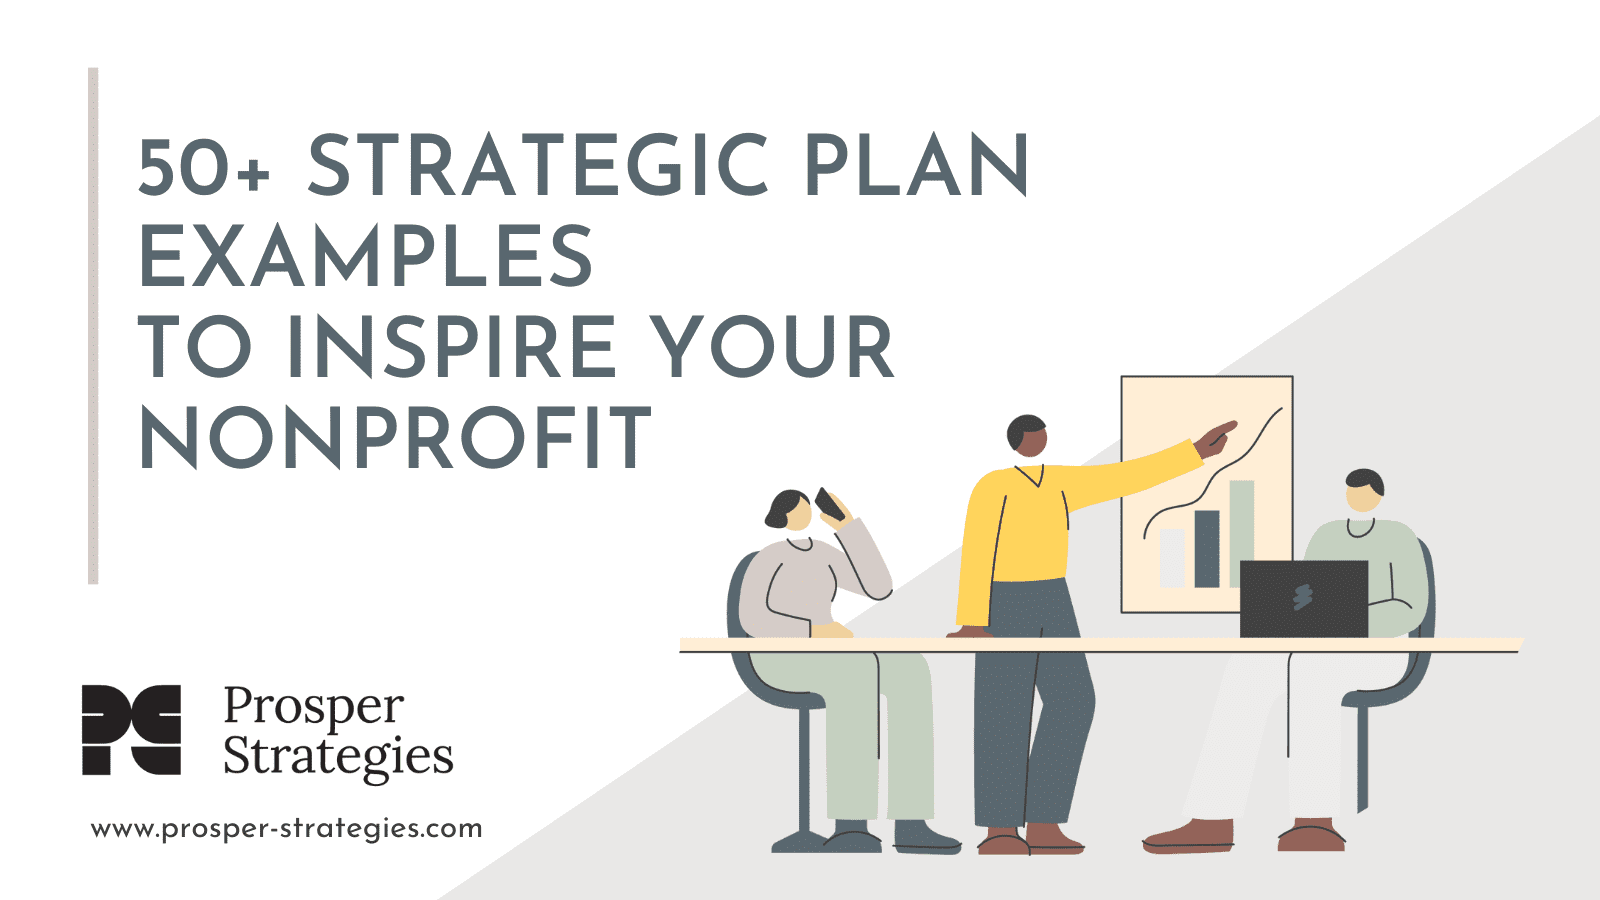 50+ Strategic Plan Examples to Inspire Your Nonprofit